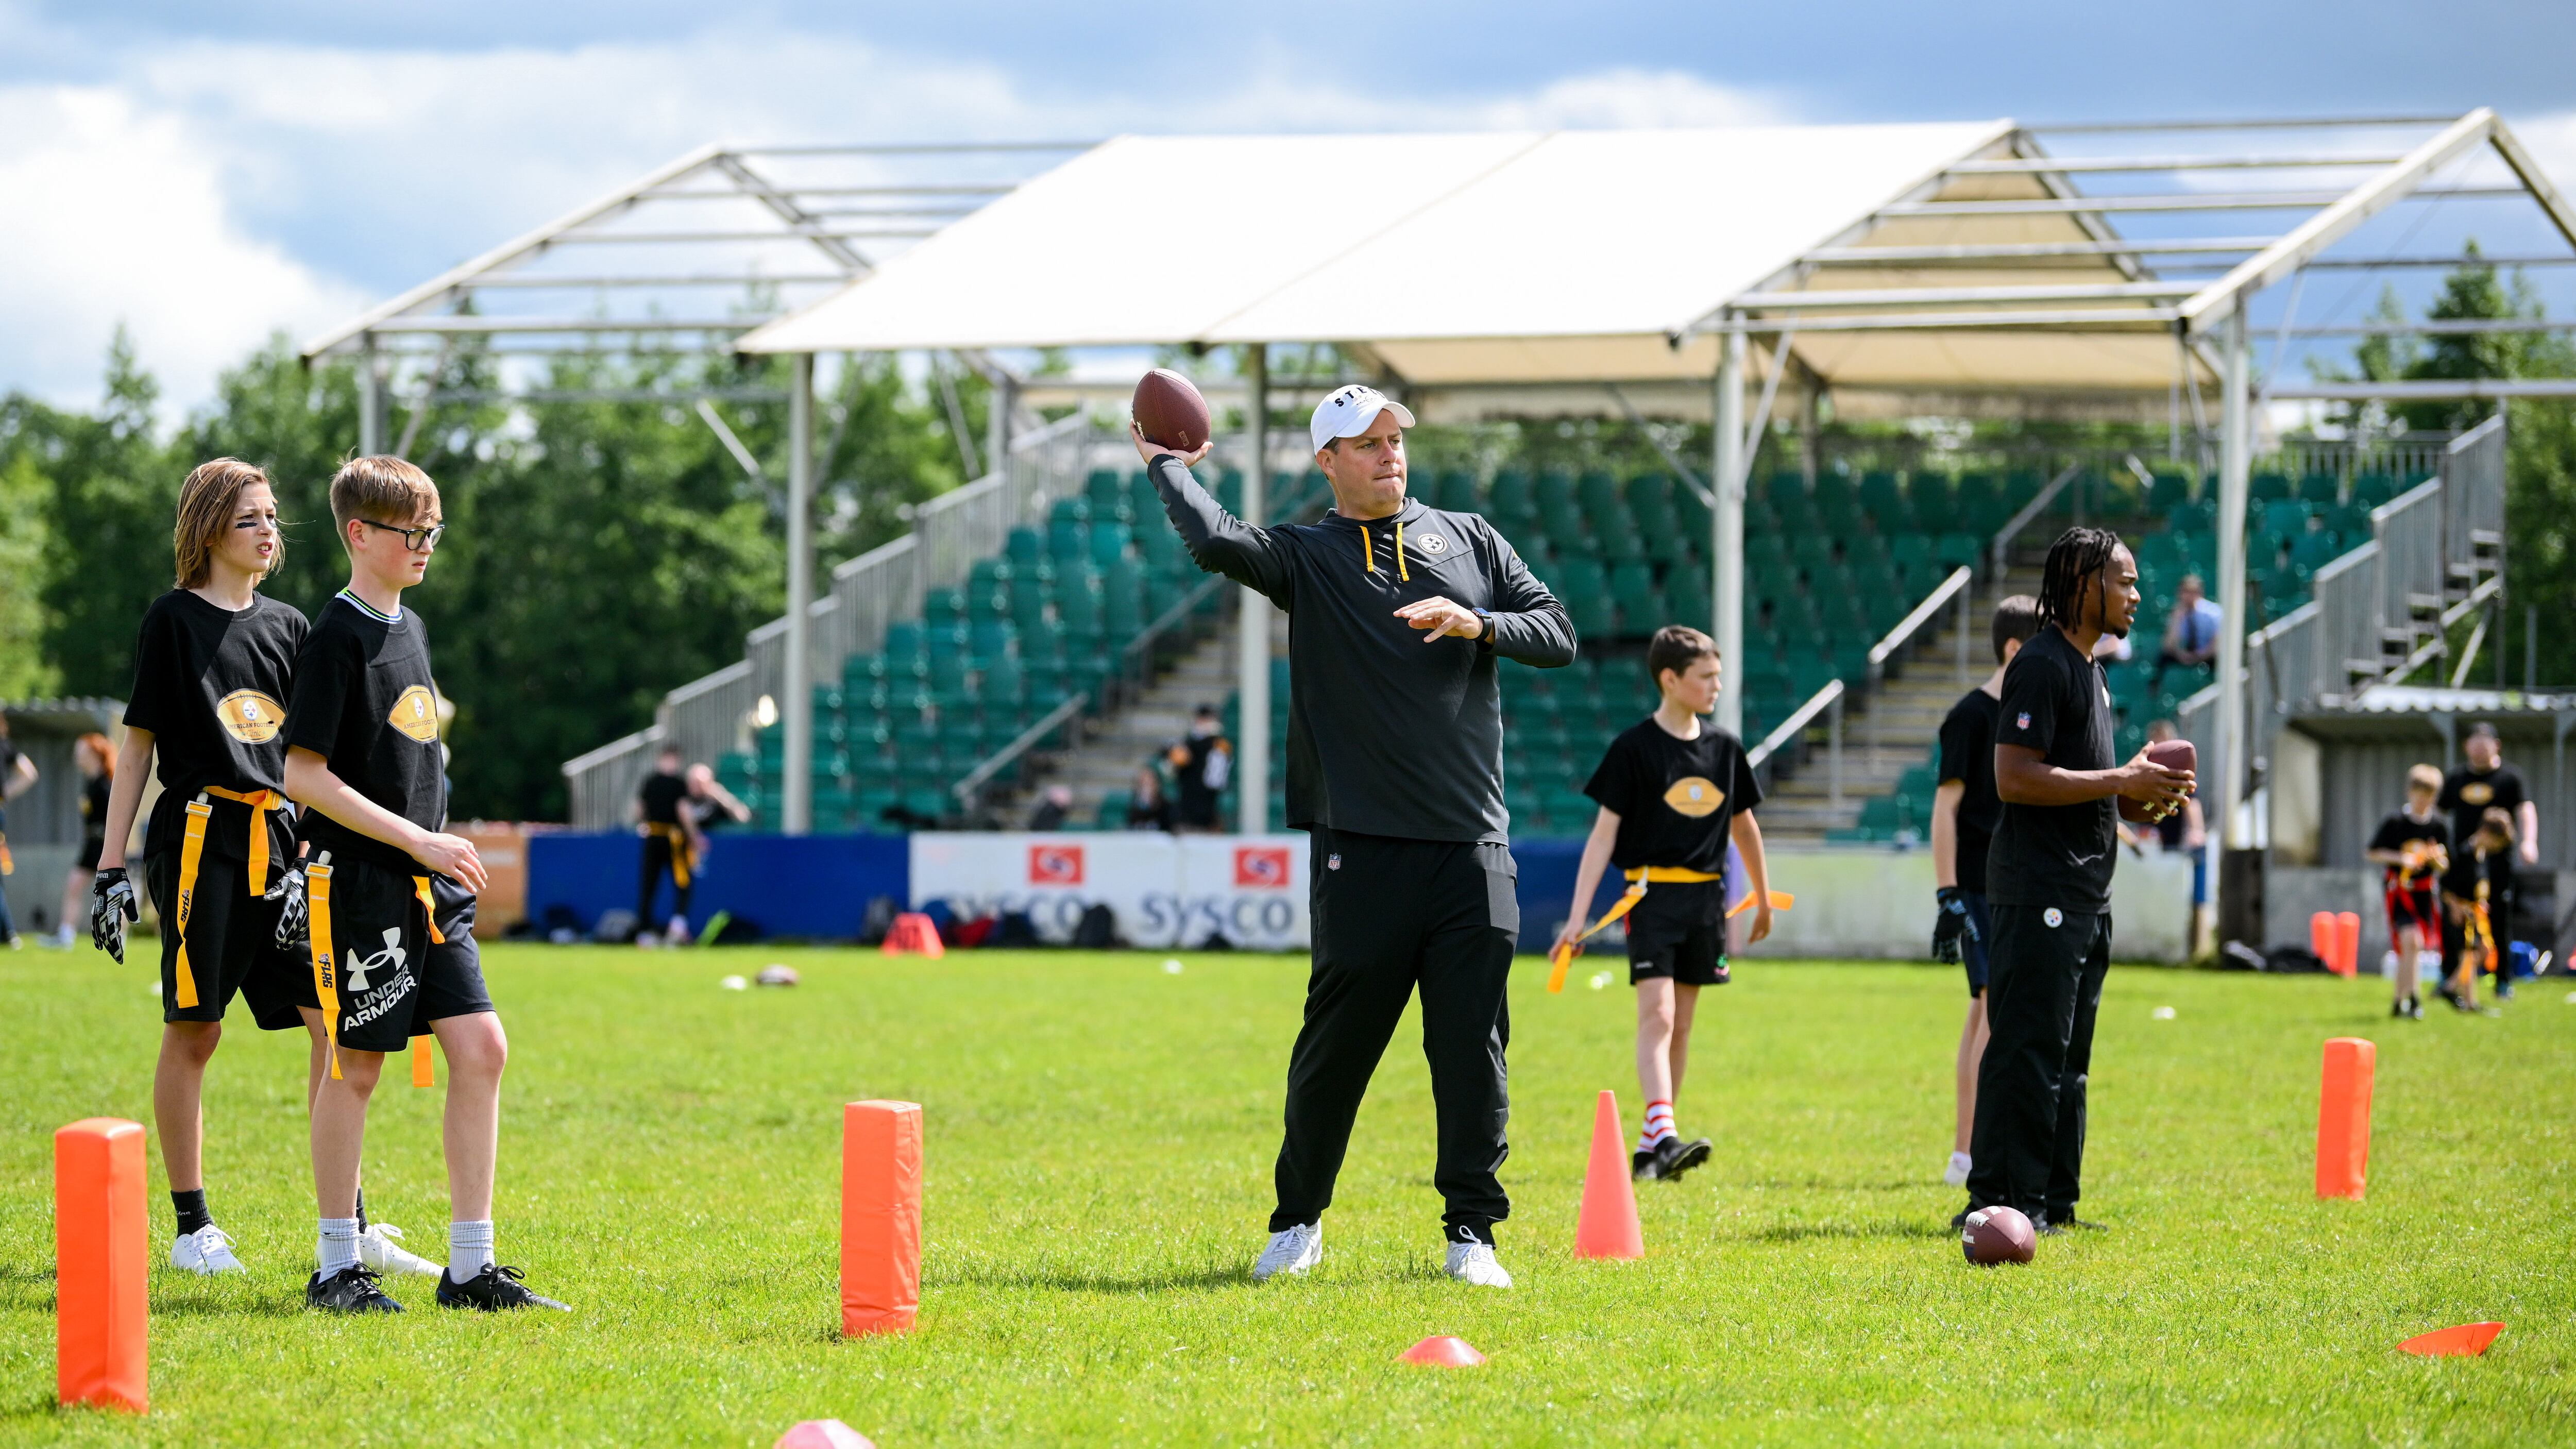 Daniel Rooney of the Pittsburgh Steelers throwing a football with kids at Deramore Park in Belfast during the Steelers Youth Camp